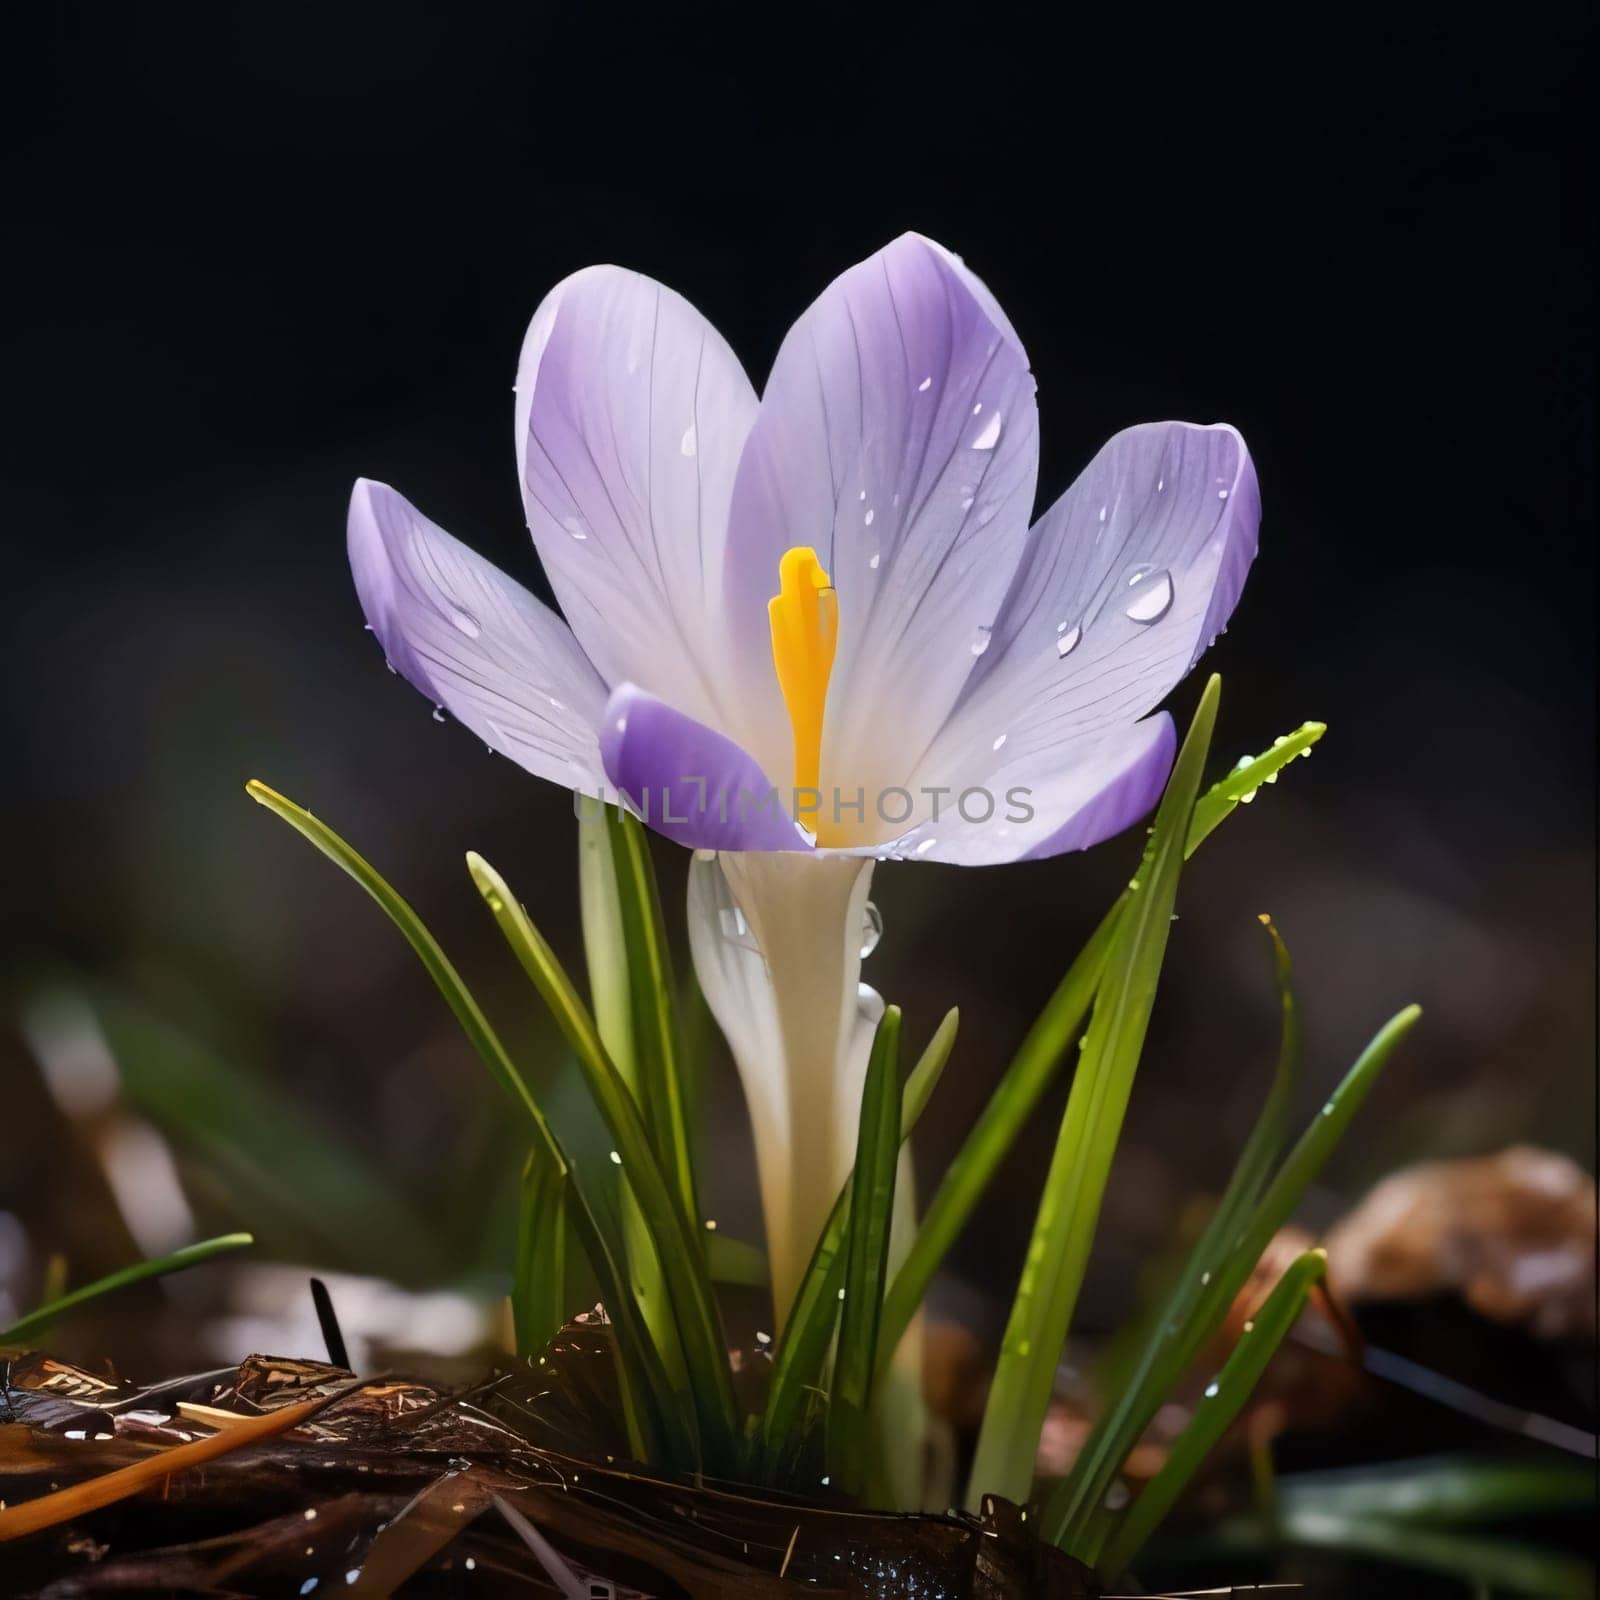 Purple spring crocus growing out of mulch. Flowering flowers, a symbol of spring, new life. A joyful time of nature waking up to life.